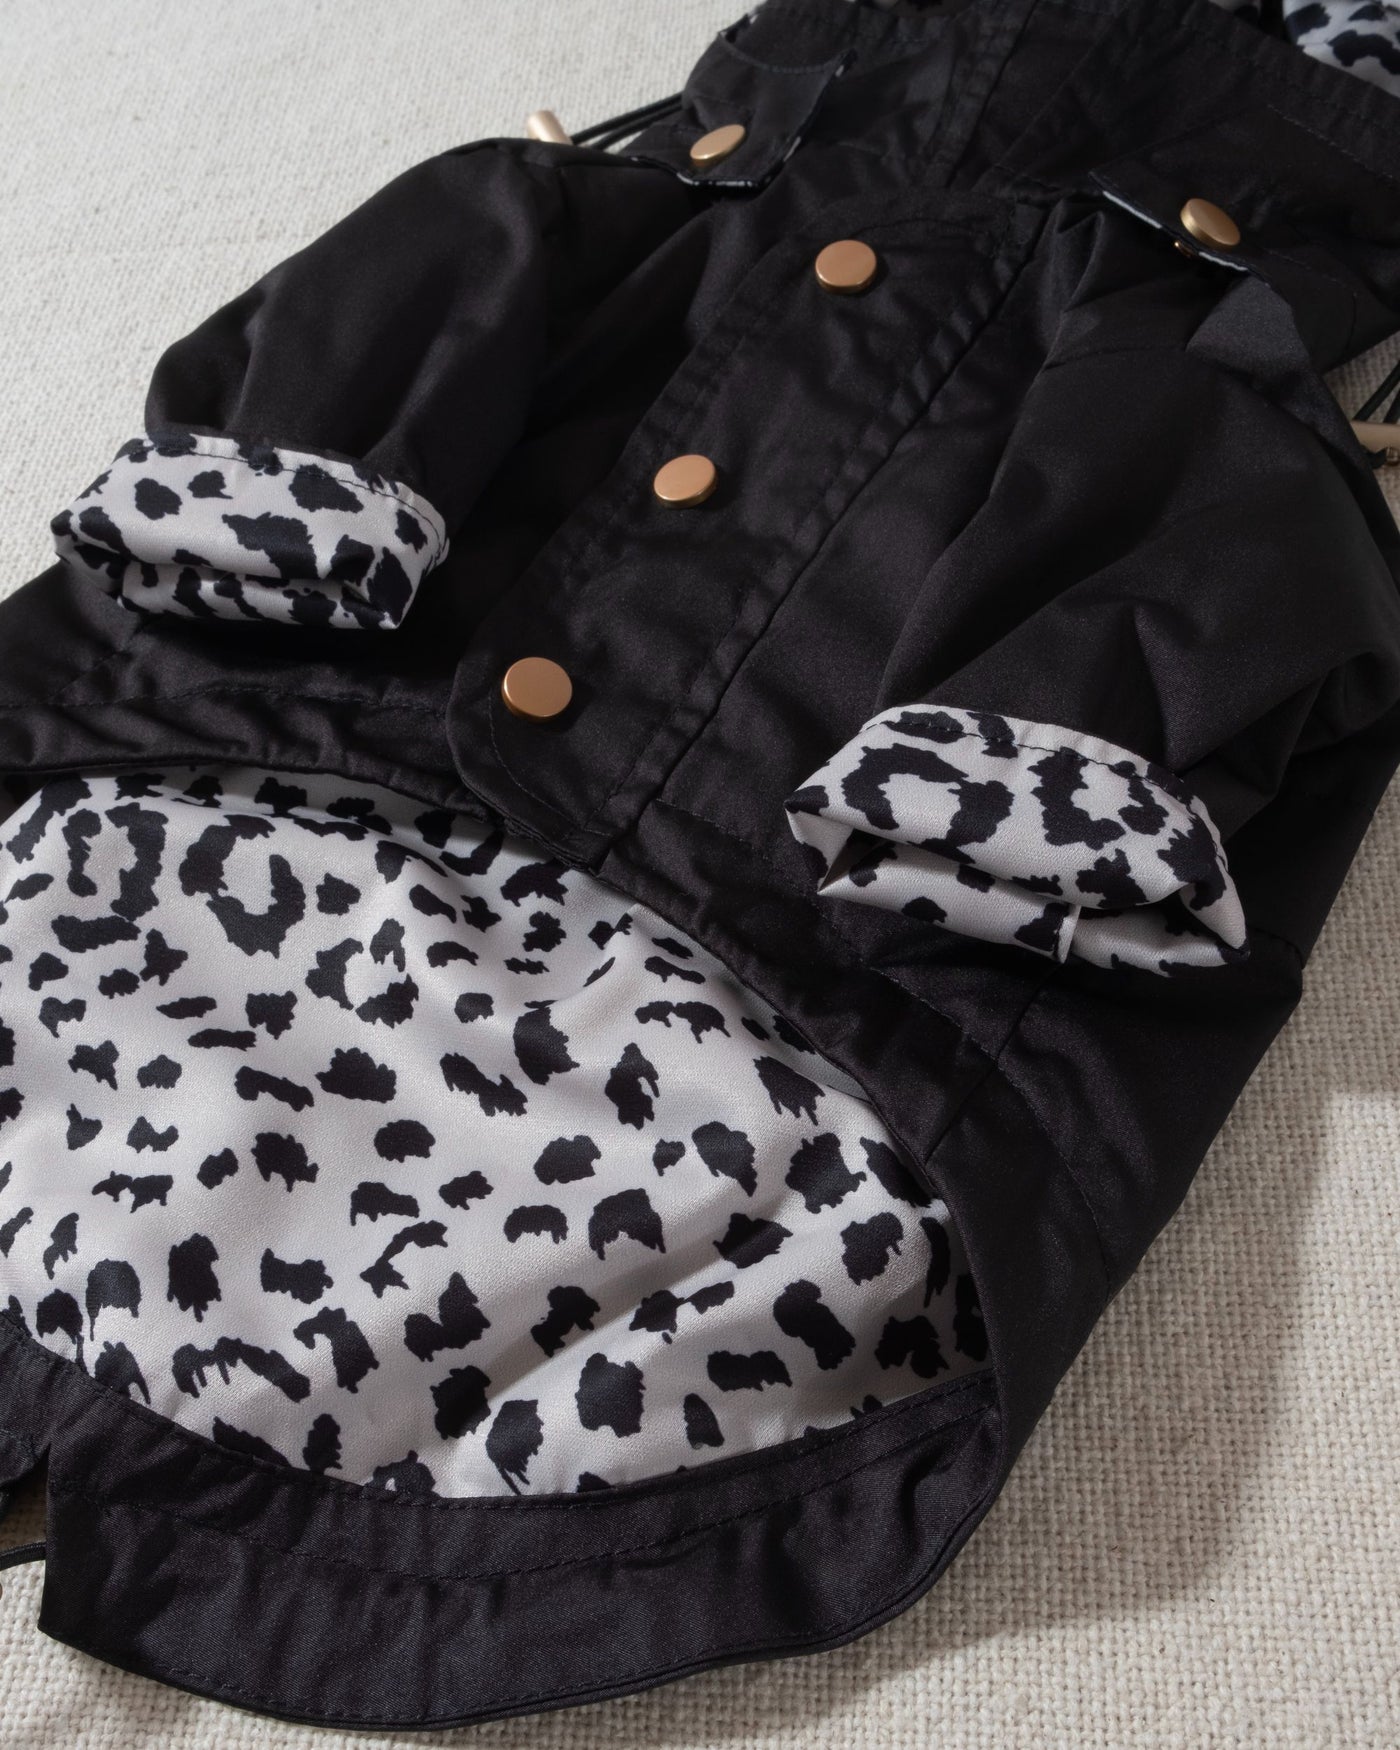 black dog raincoat with leopard print lining and removable hood